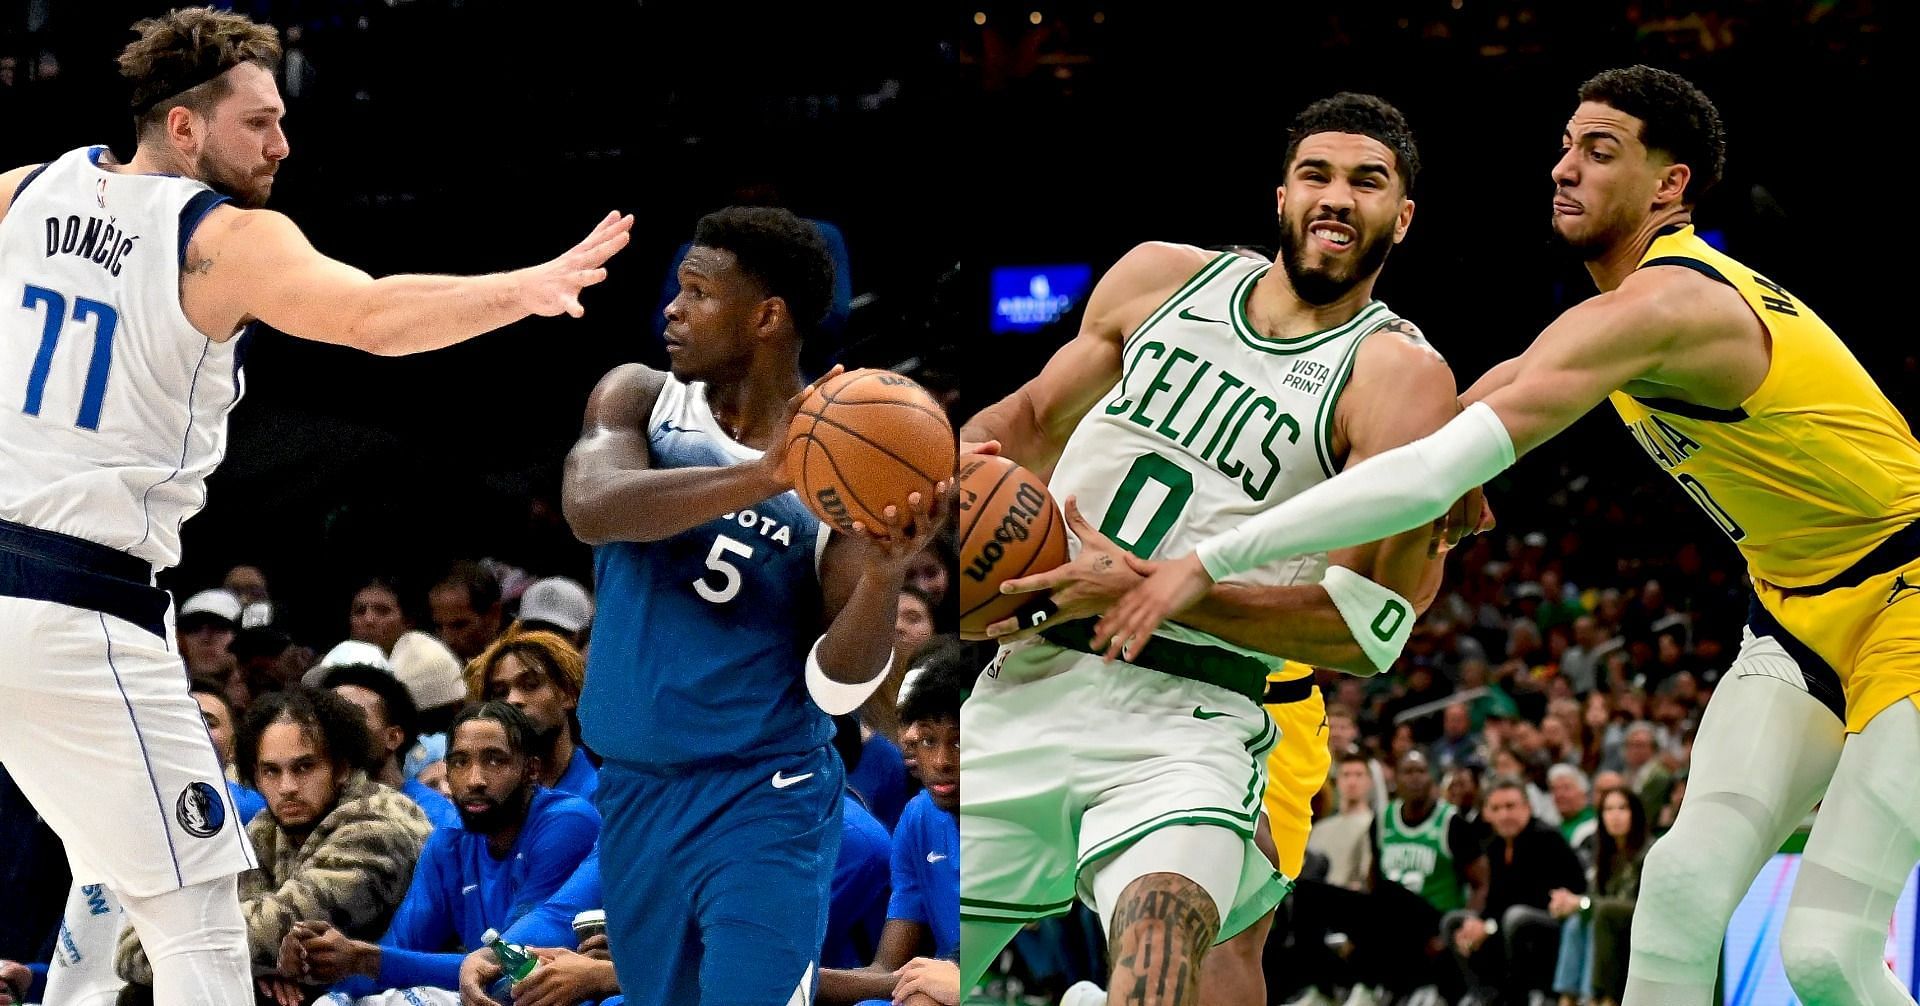 NBA fans weigh in on Minnesota-Dallas having heftier get-in price than Boston-Indiana